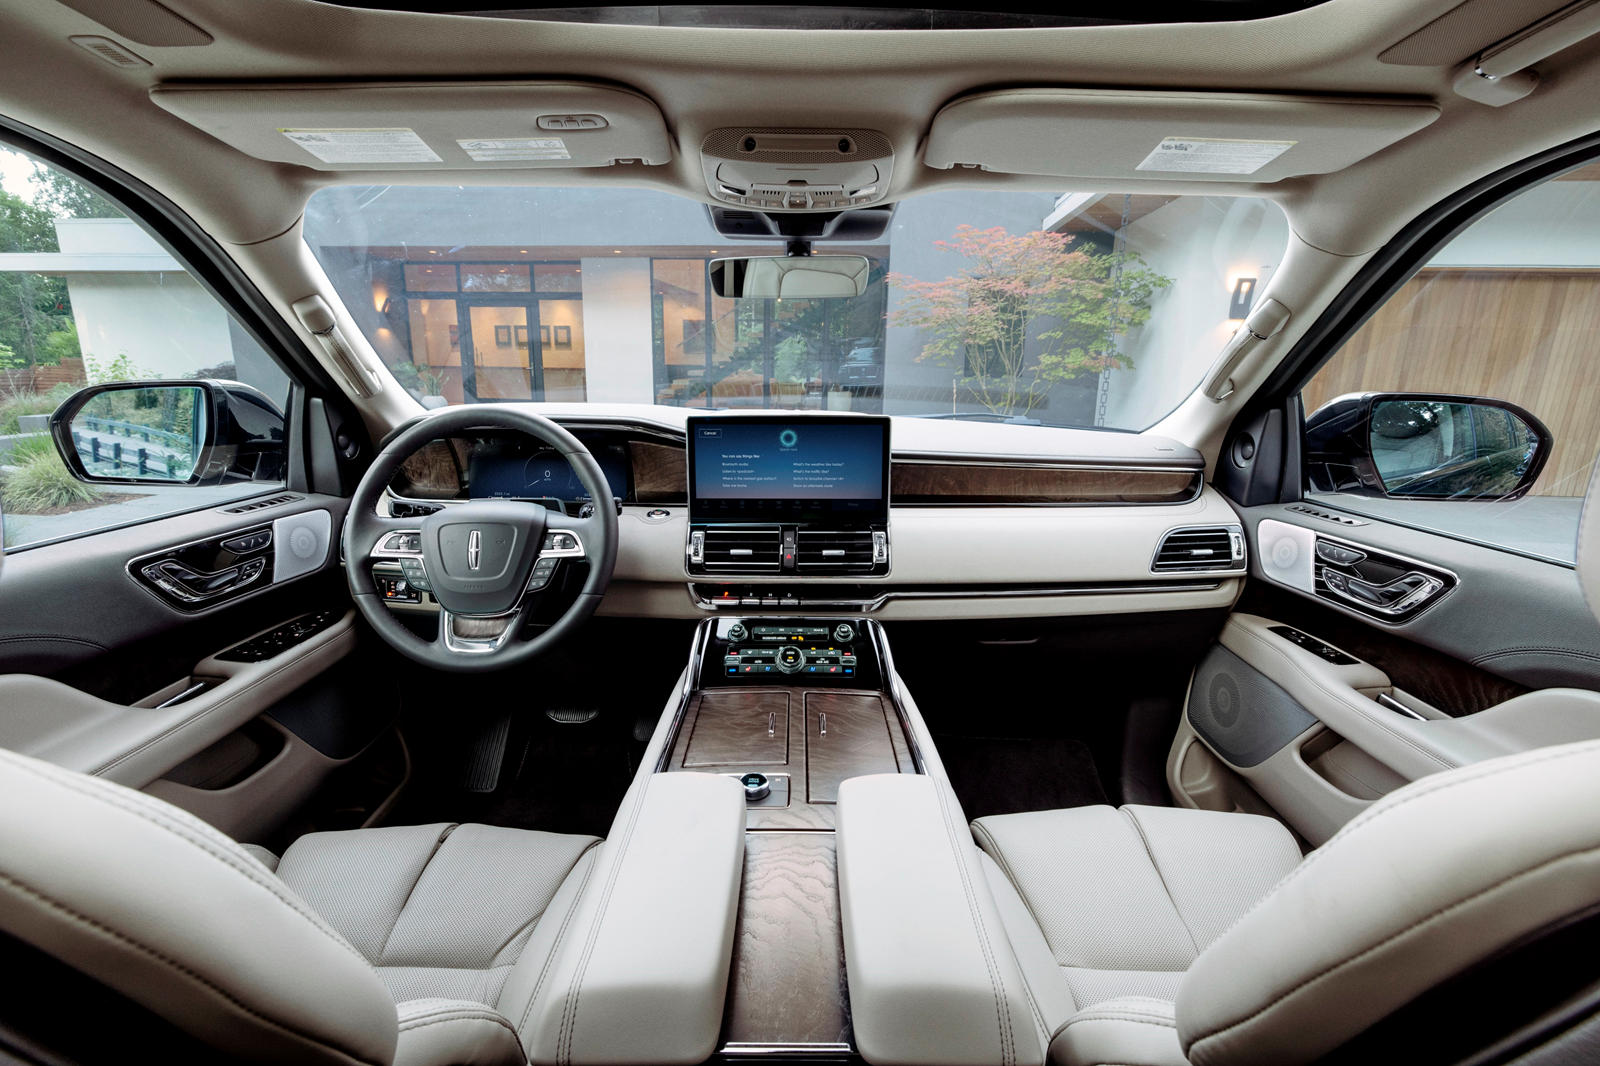 a look inside the new Lincoln Navigator in Austin